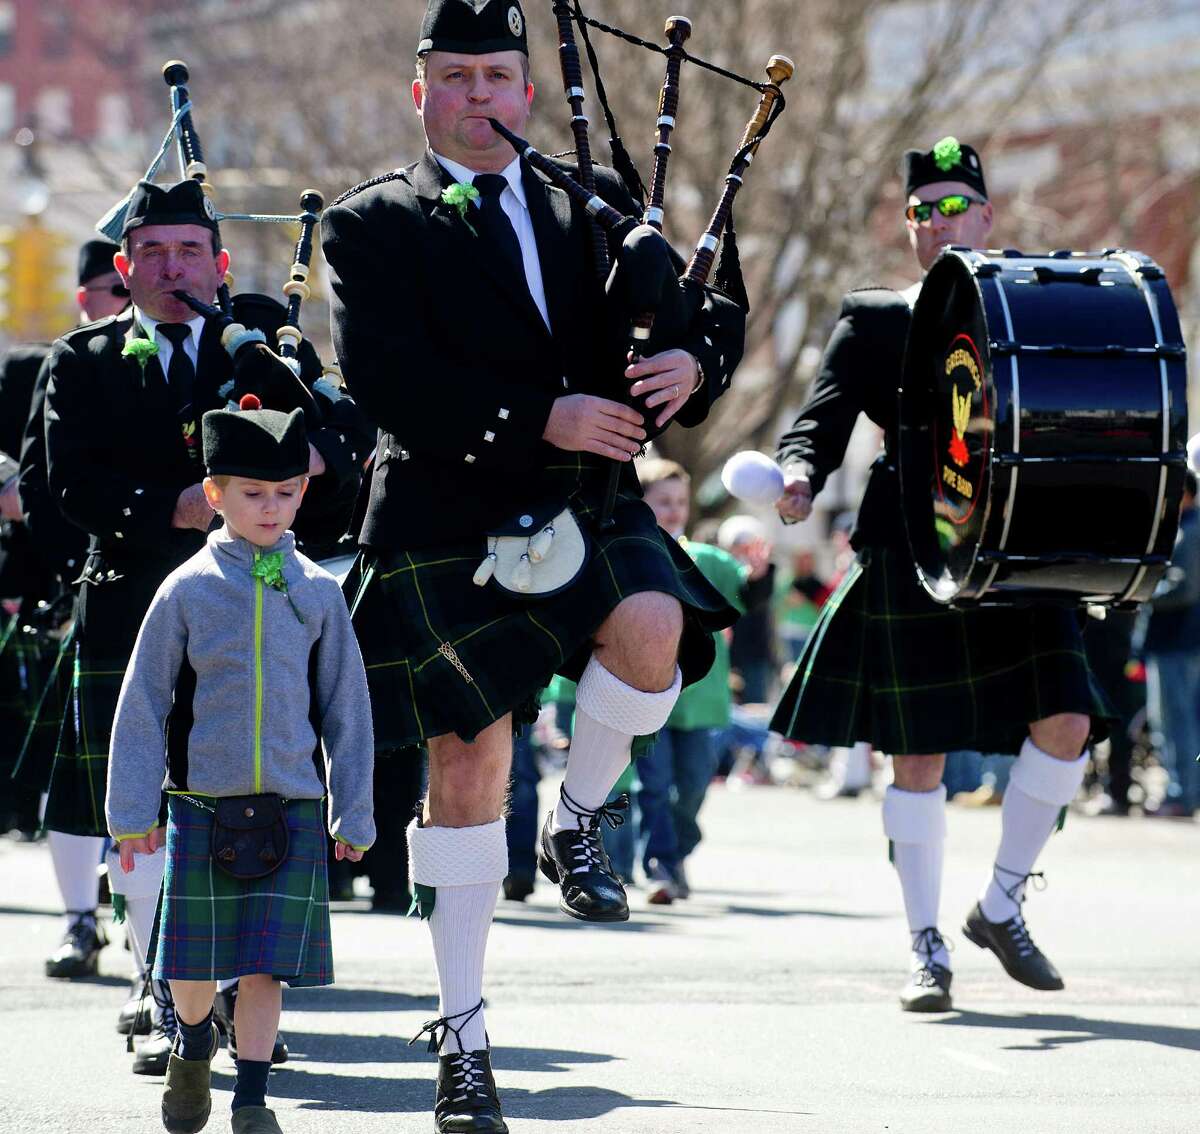 Bagpipers perform during Saturday's Saint Patrick's Day parade in Stamford, Conn., on March 9, 2013.